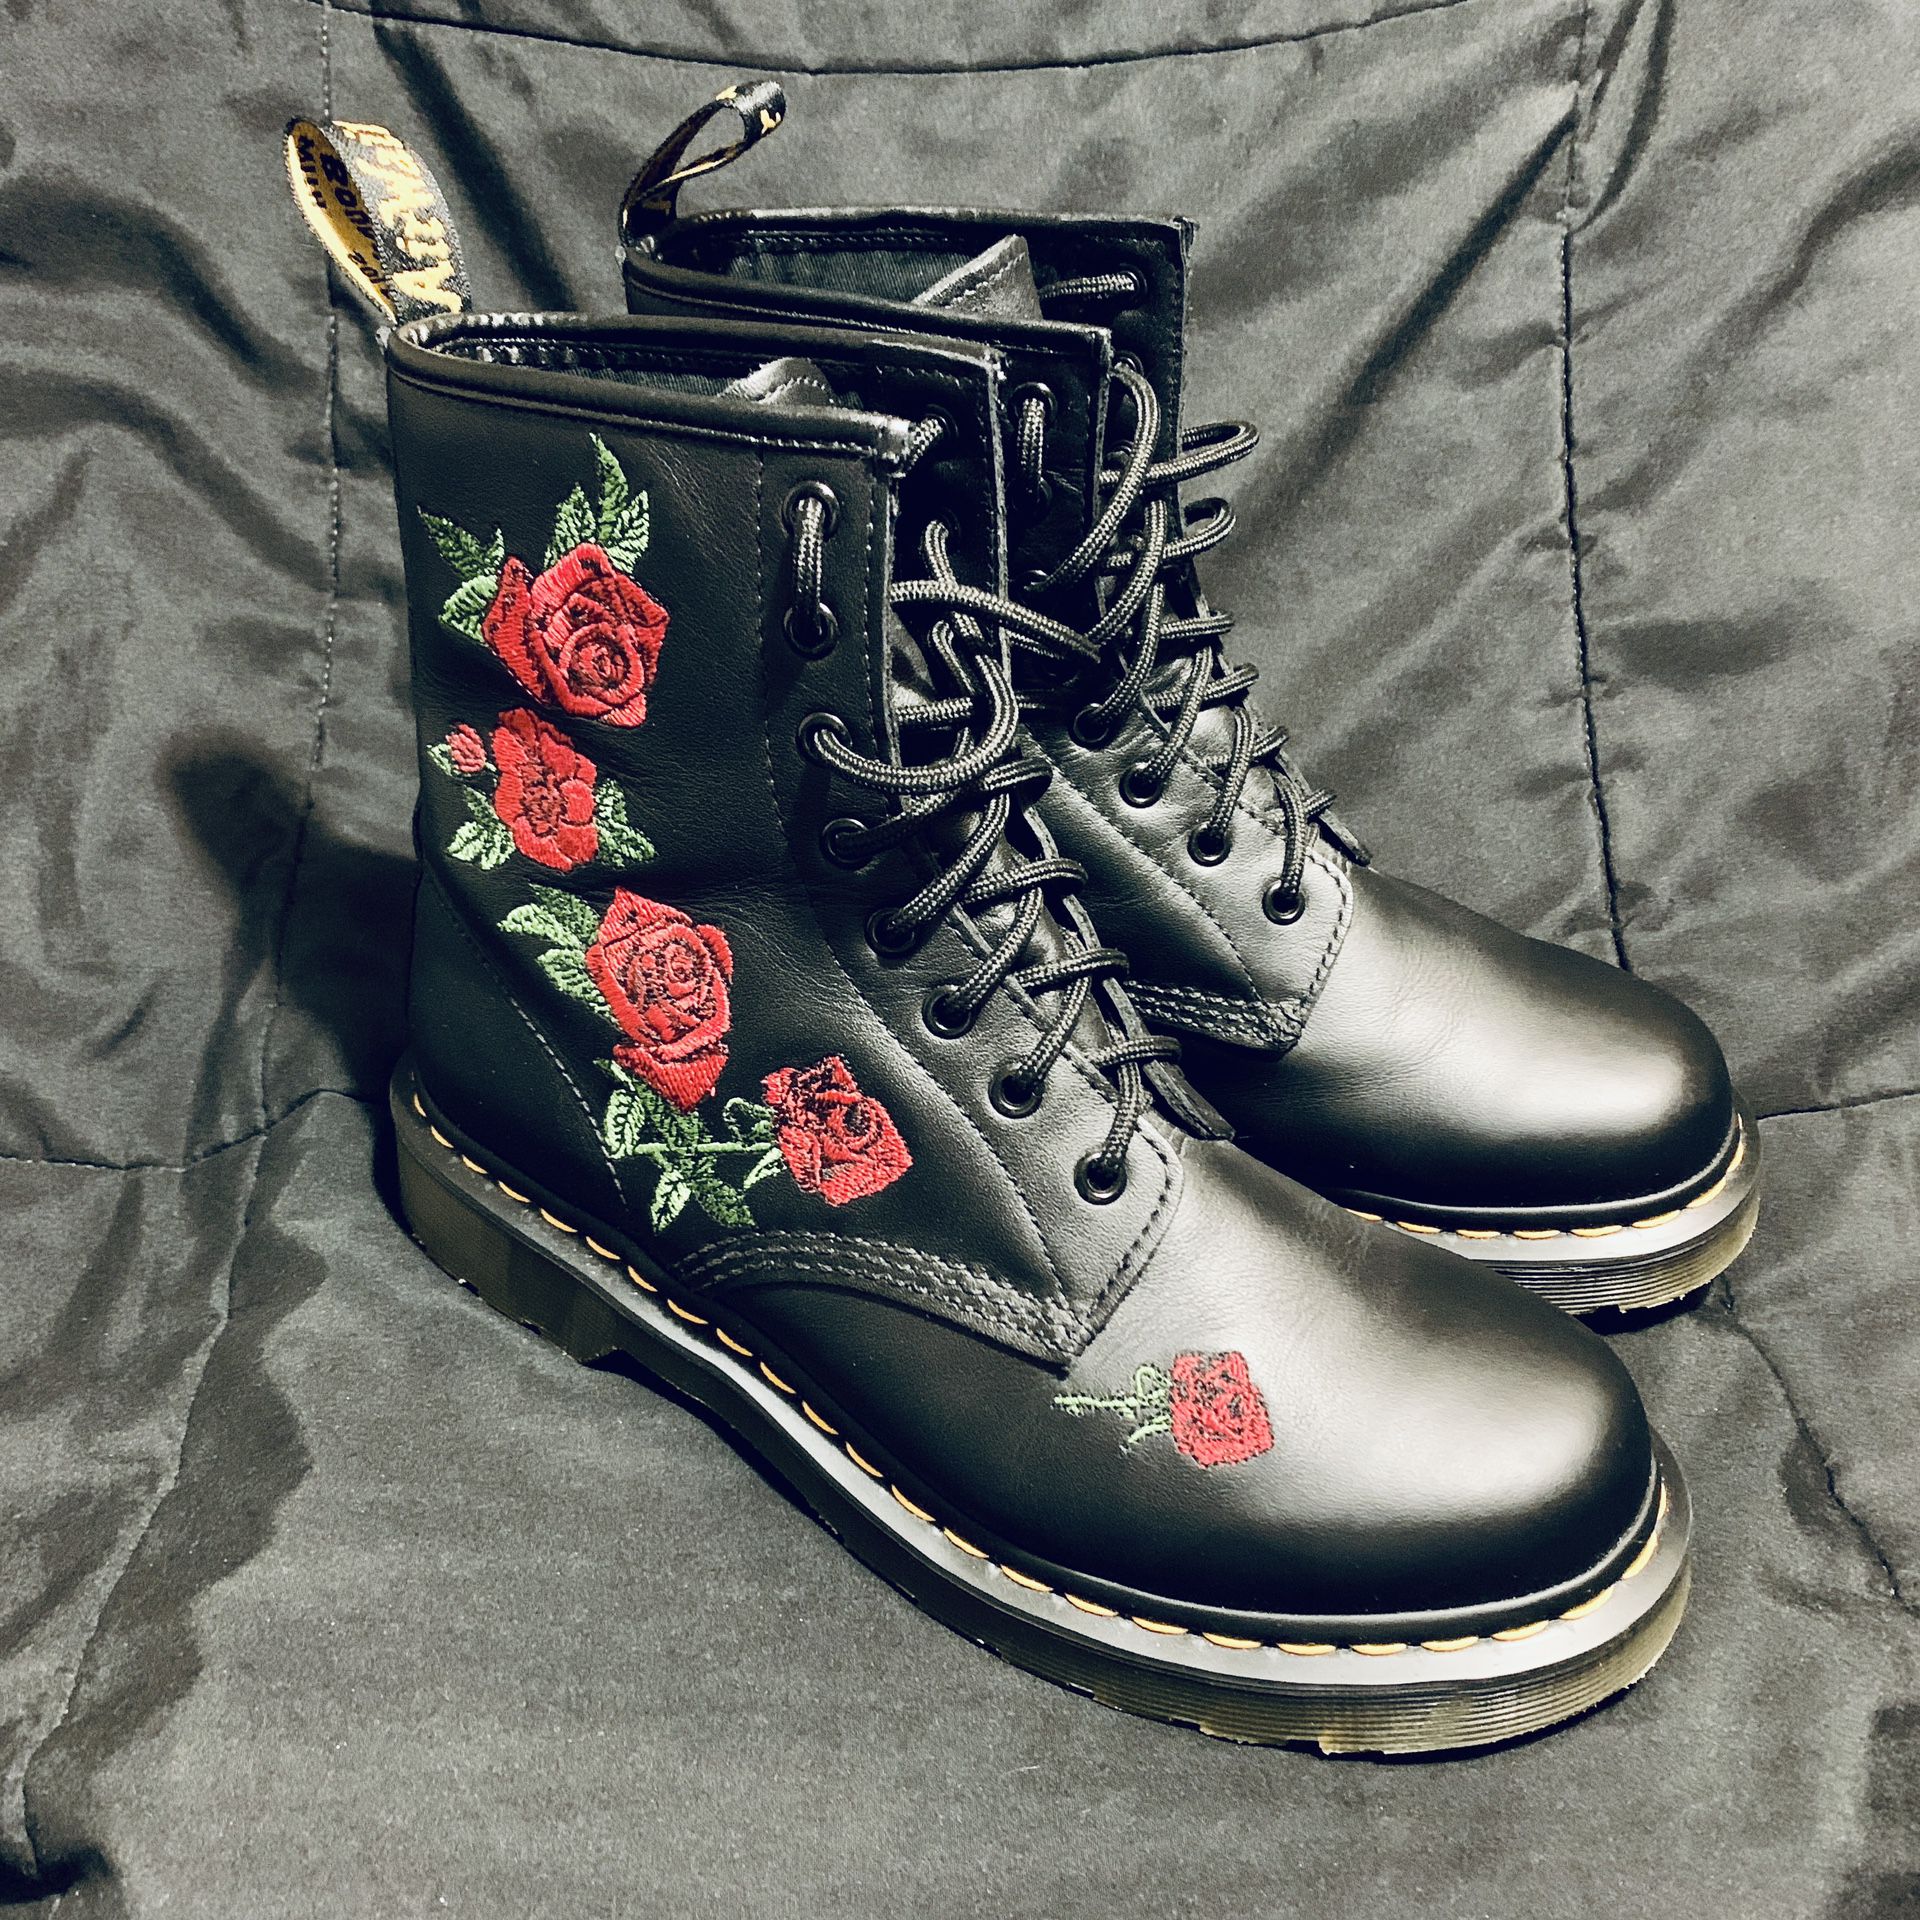 New Dr. Martens Women’s Boots 1460 Vonda Size 9 Black Red Roses